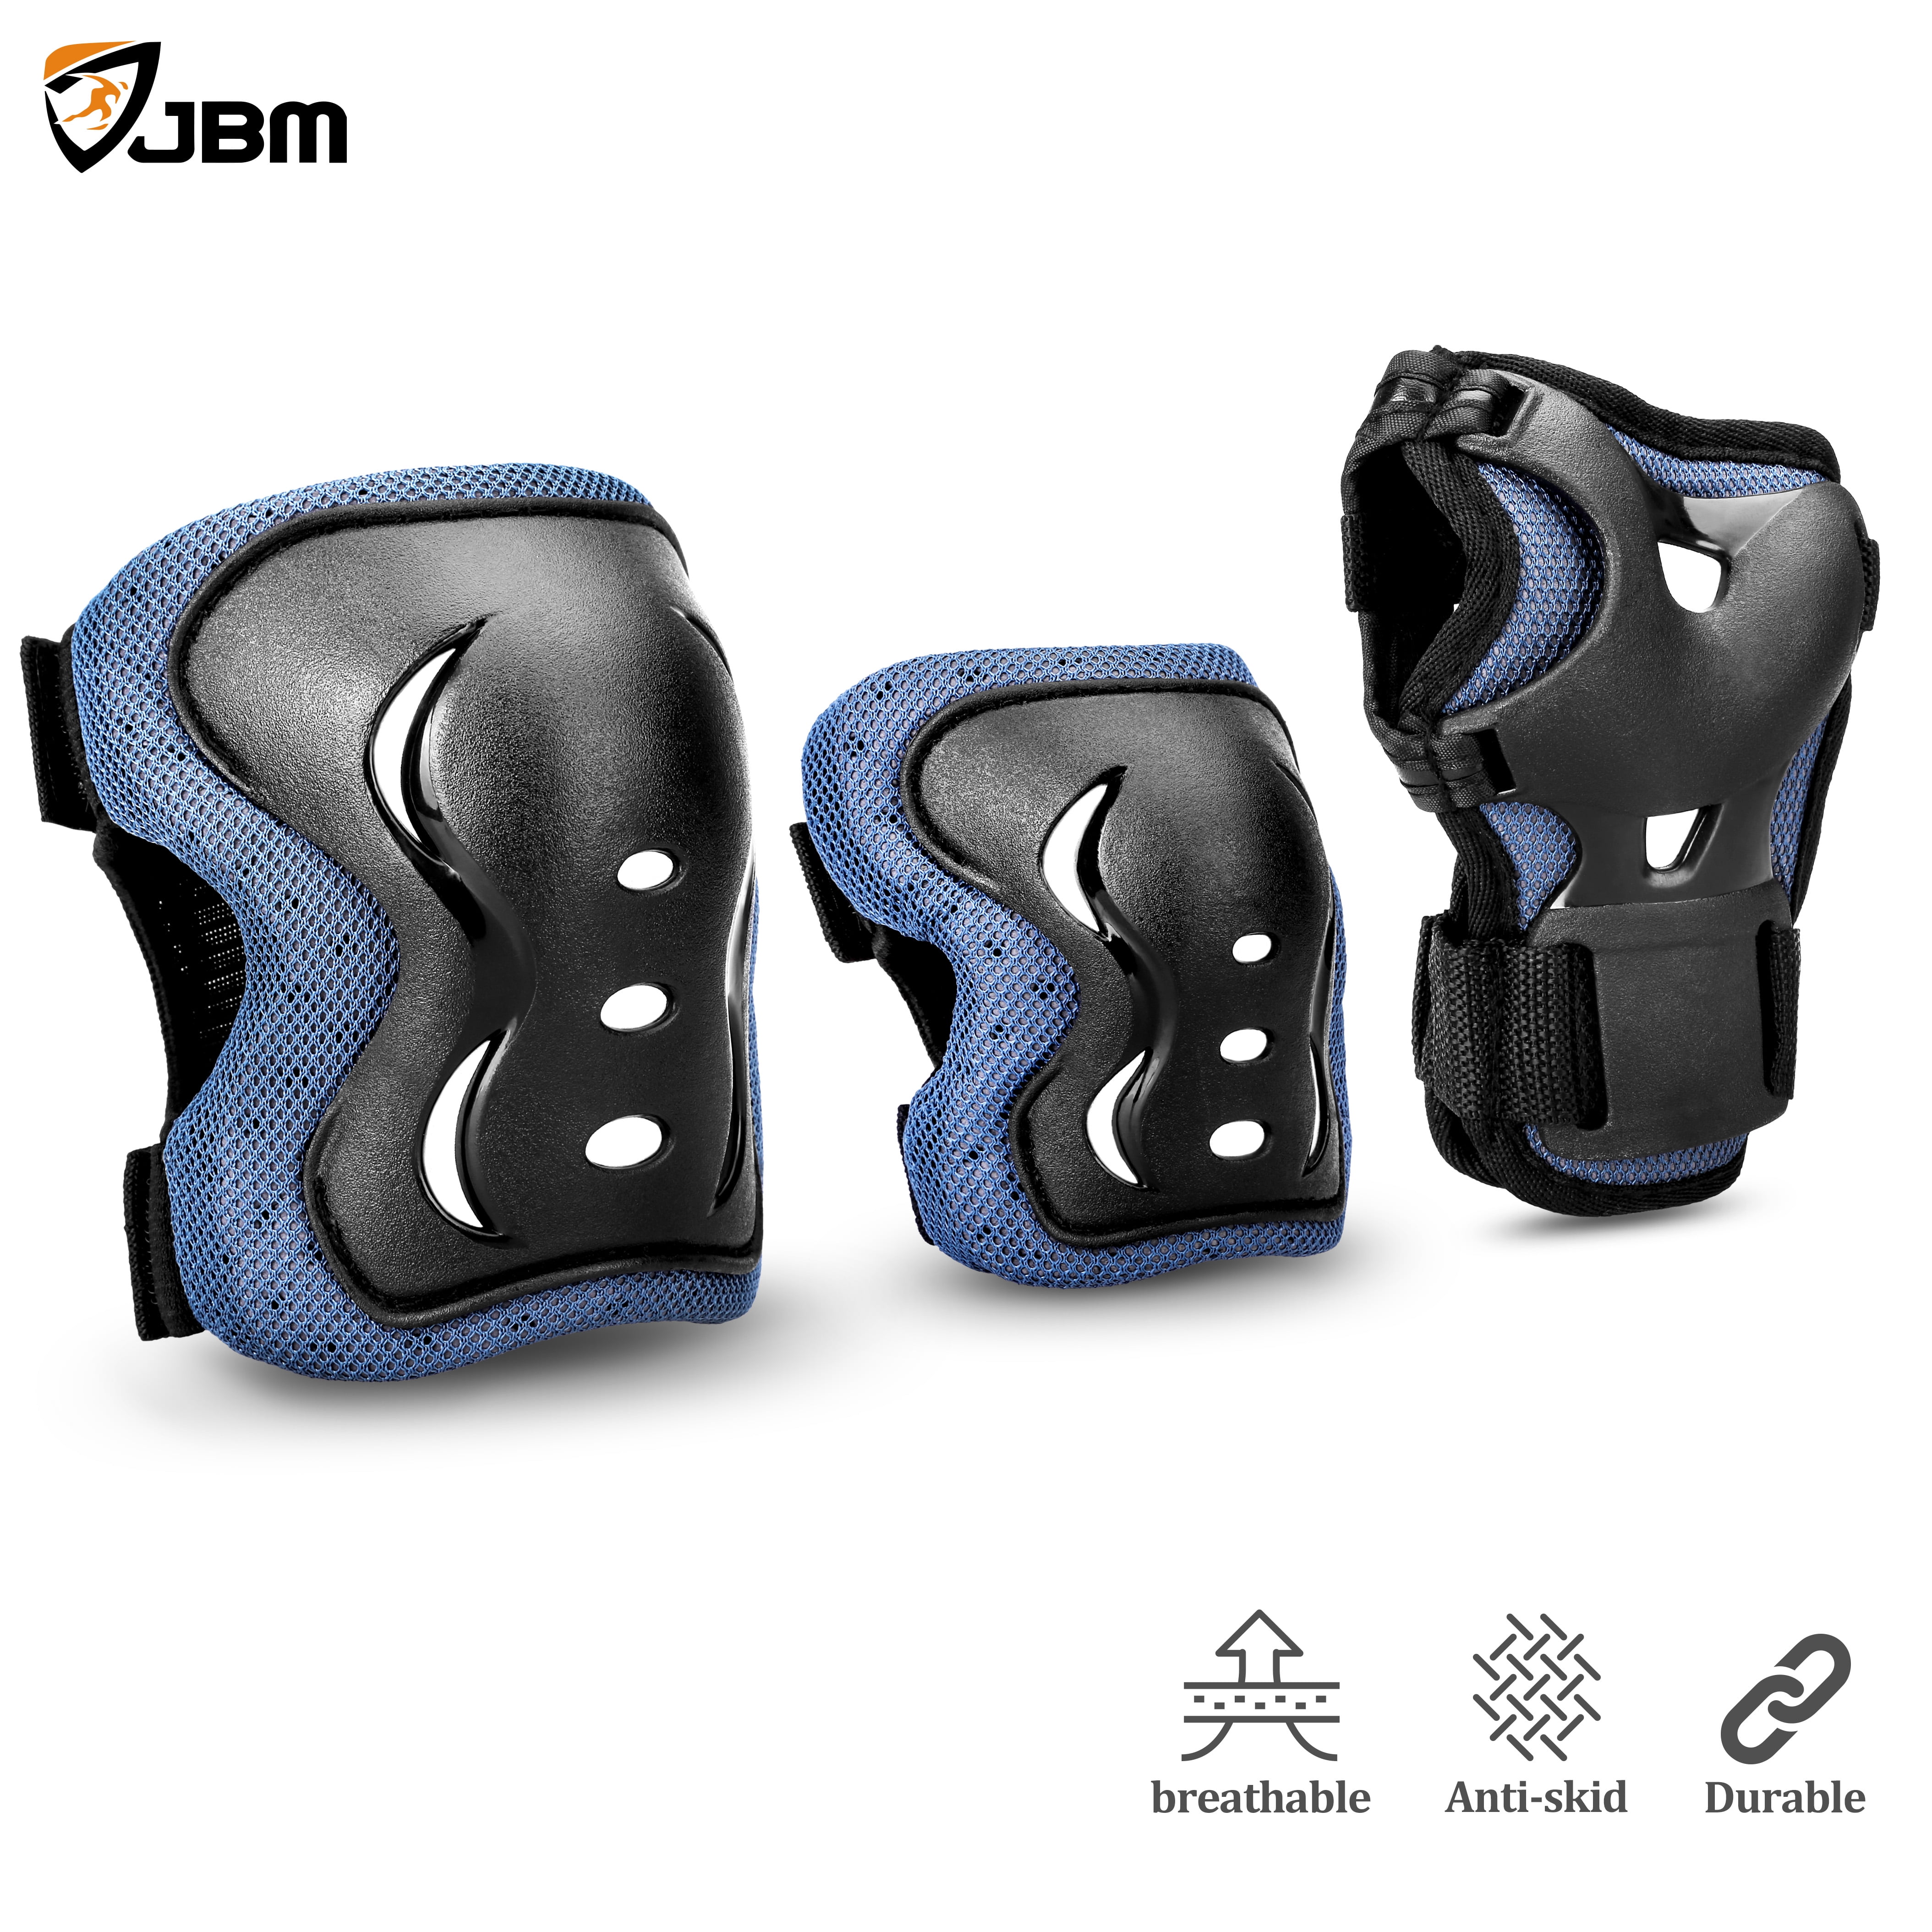 Adjustable Reflective Safety Knee Pads Elbo Protective Gear Set for Kids/Youth 